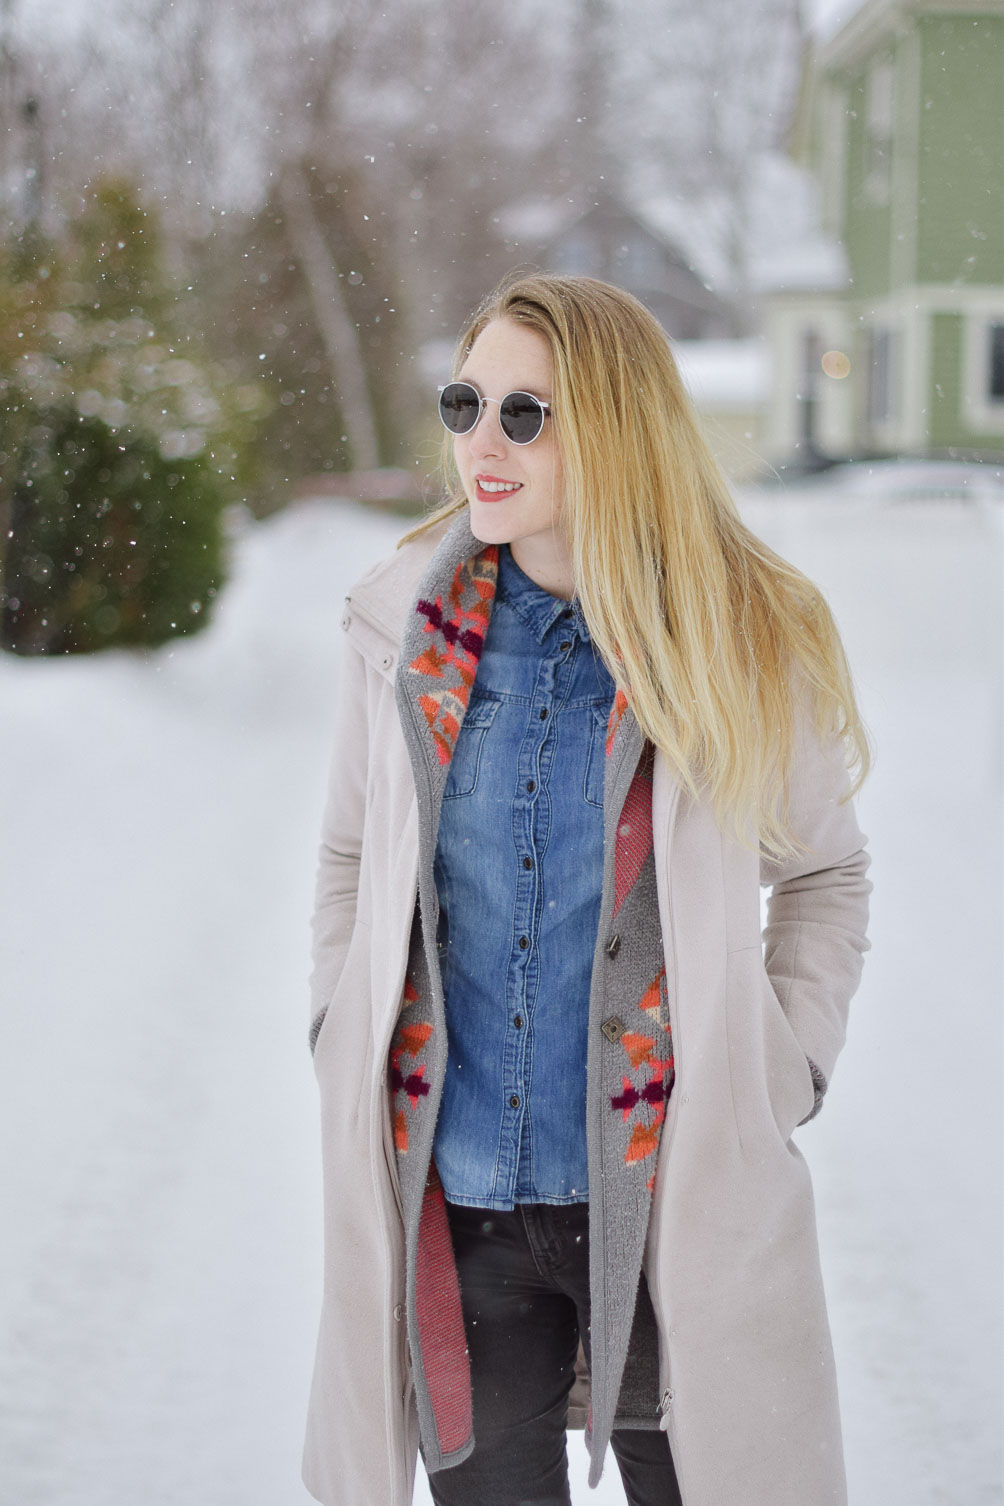 styling this cozy winter look with an aztec print sweater, chambray shirt, gray skinny jeans, and round sunglasses